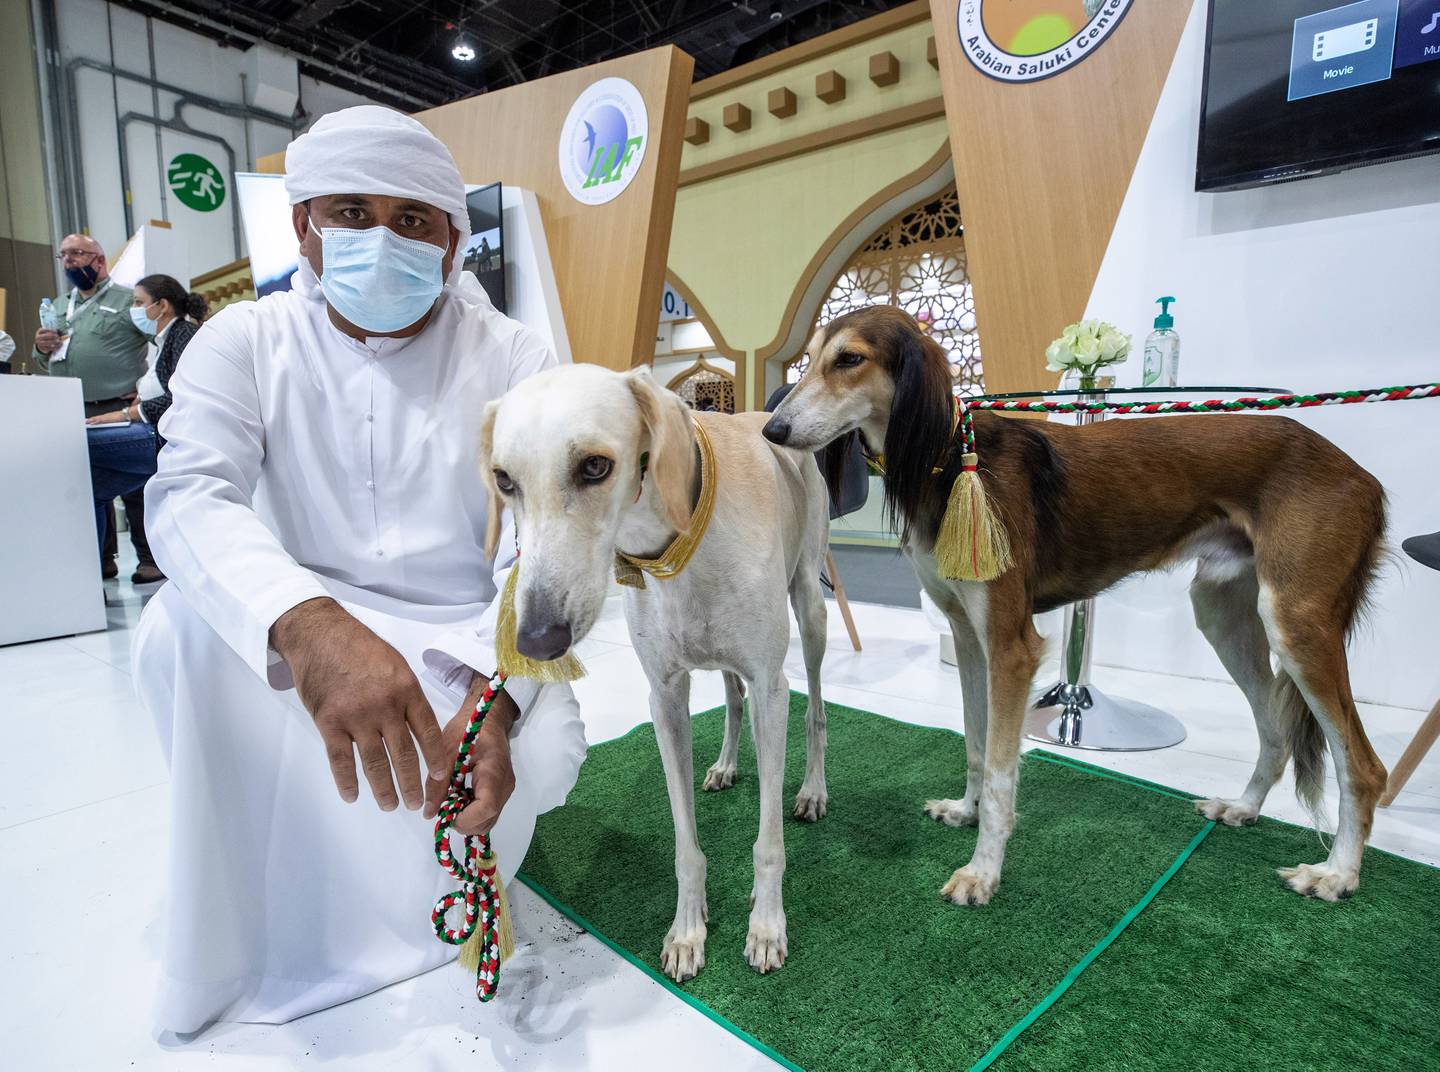 Saluki dogs at the Abu Dhabi International Hunting and Equestrian Exhibition. Victor Besa / The National.